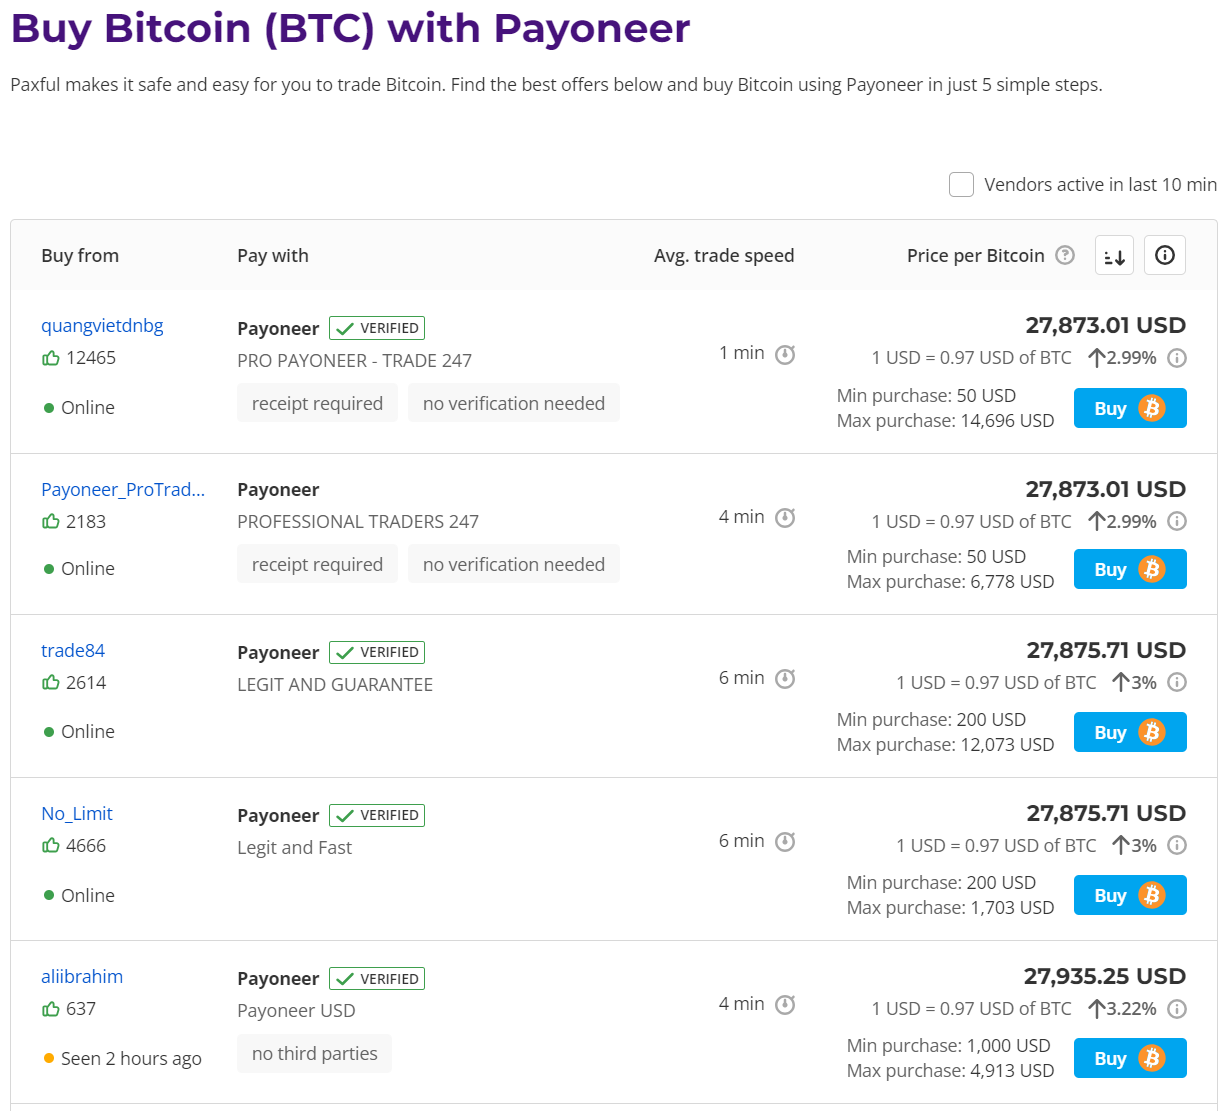 Sell bitcoin with Payoneer | BitValve P2P Crypto Exchange